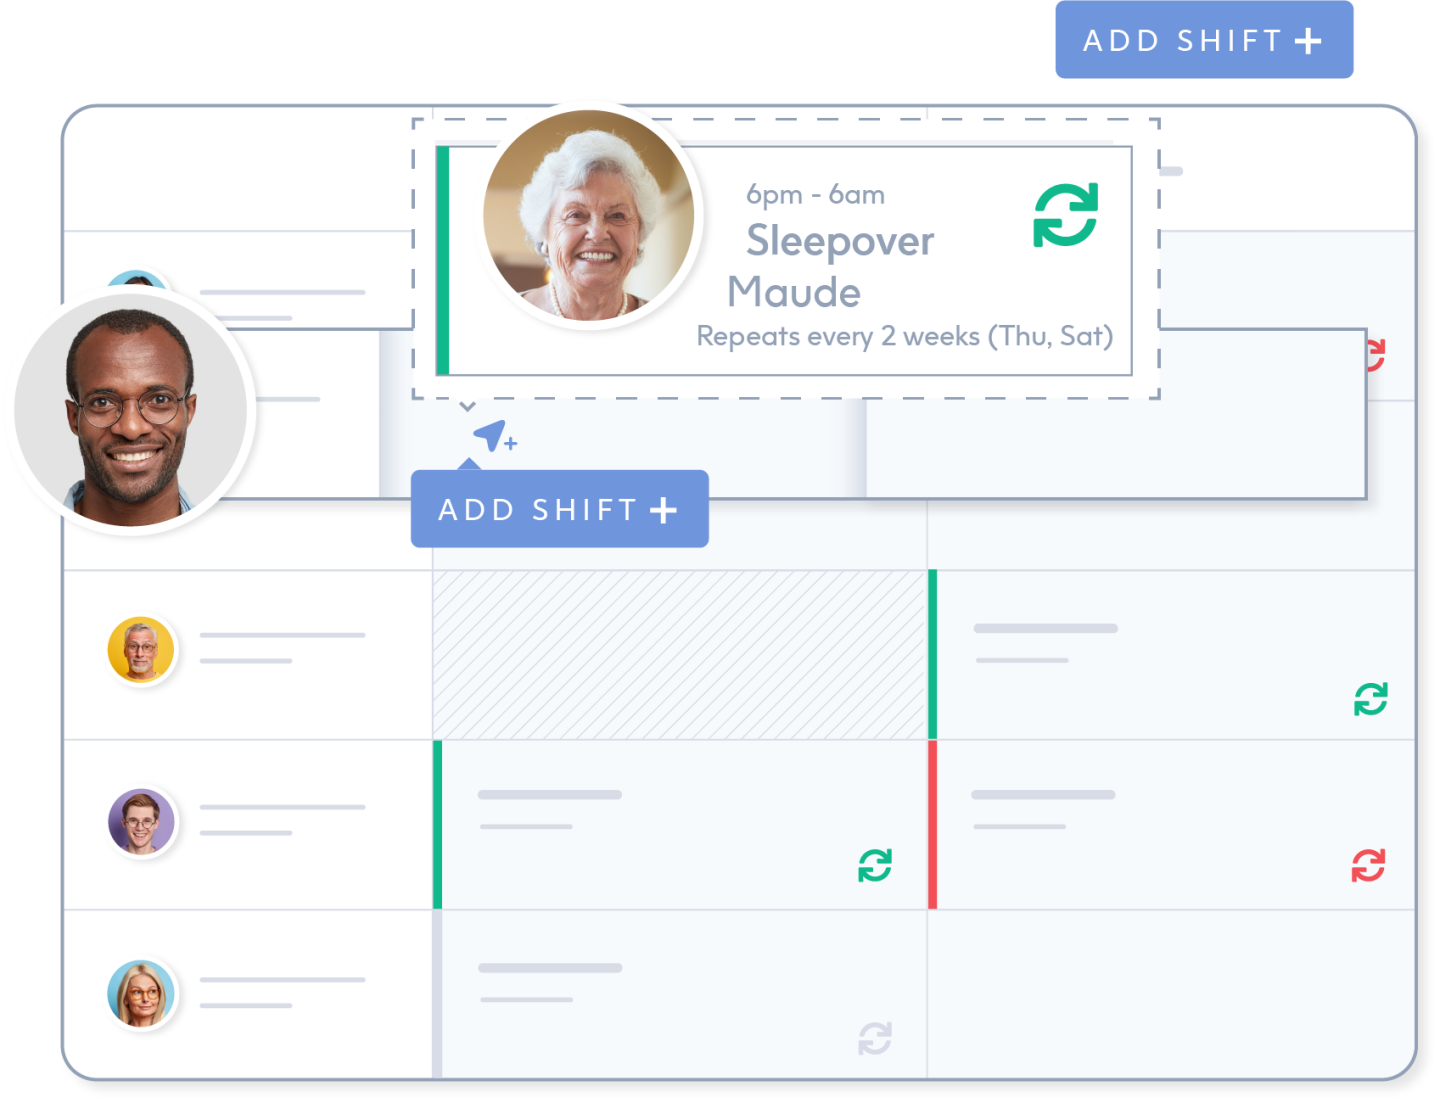 Rostering a recurring  sleepover shift with an elderly client using ShiftCare's scheduling function